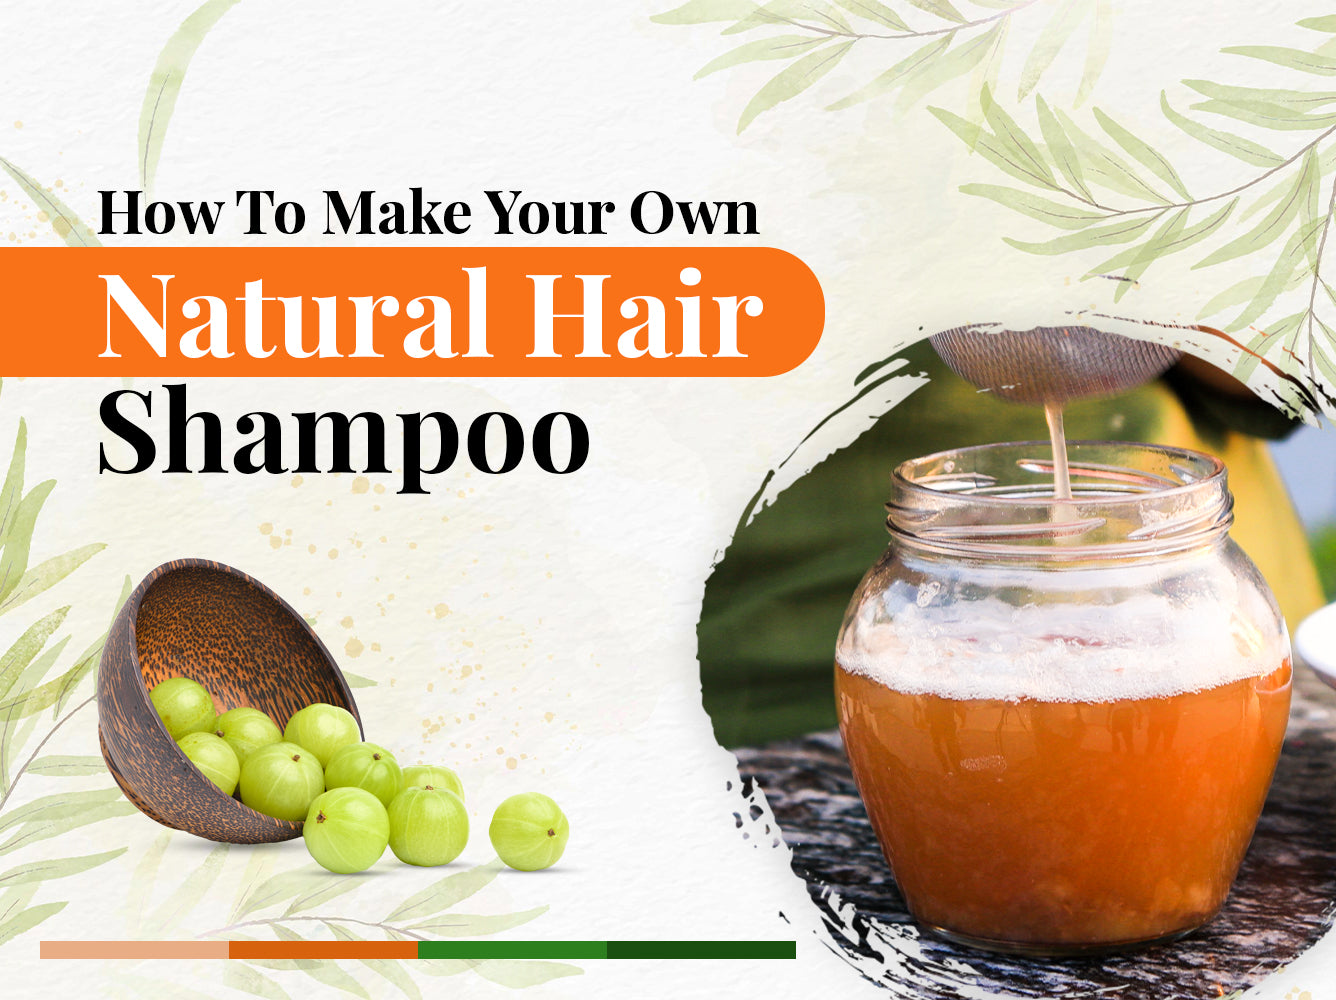 How To Make Your Own Natural Hair Shampoo